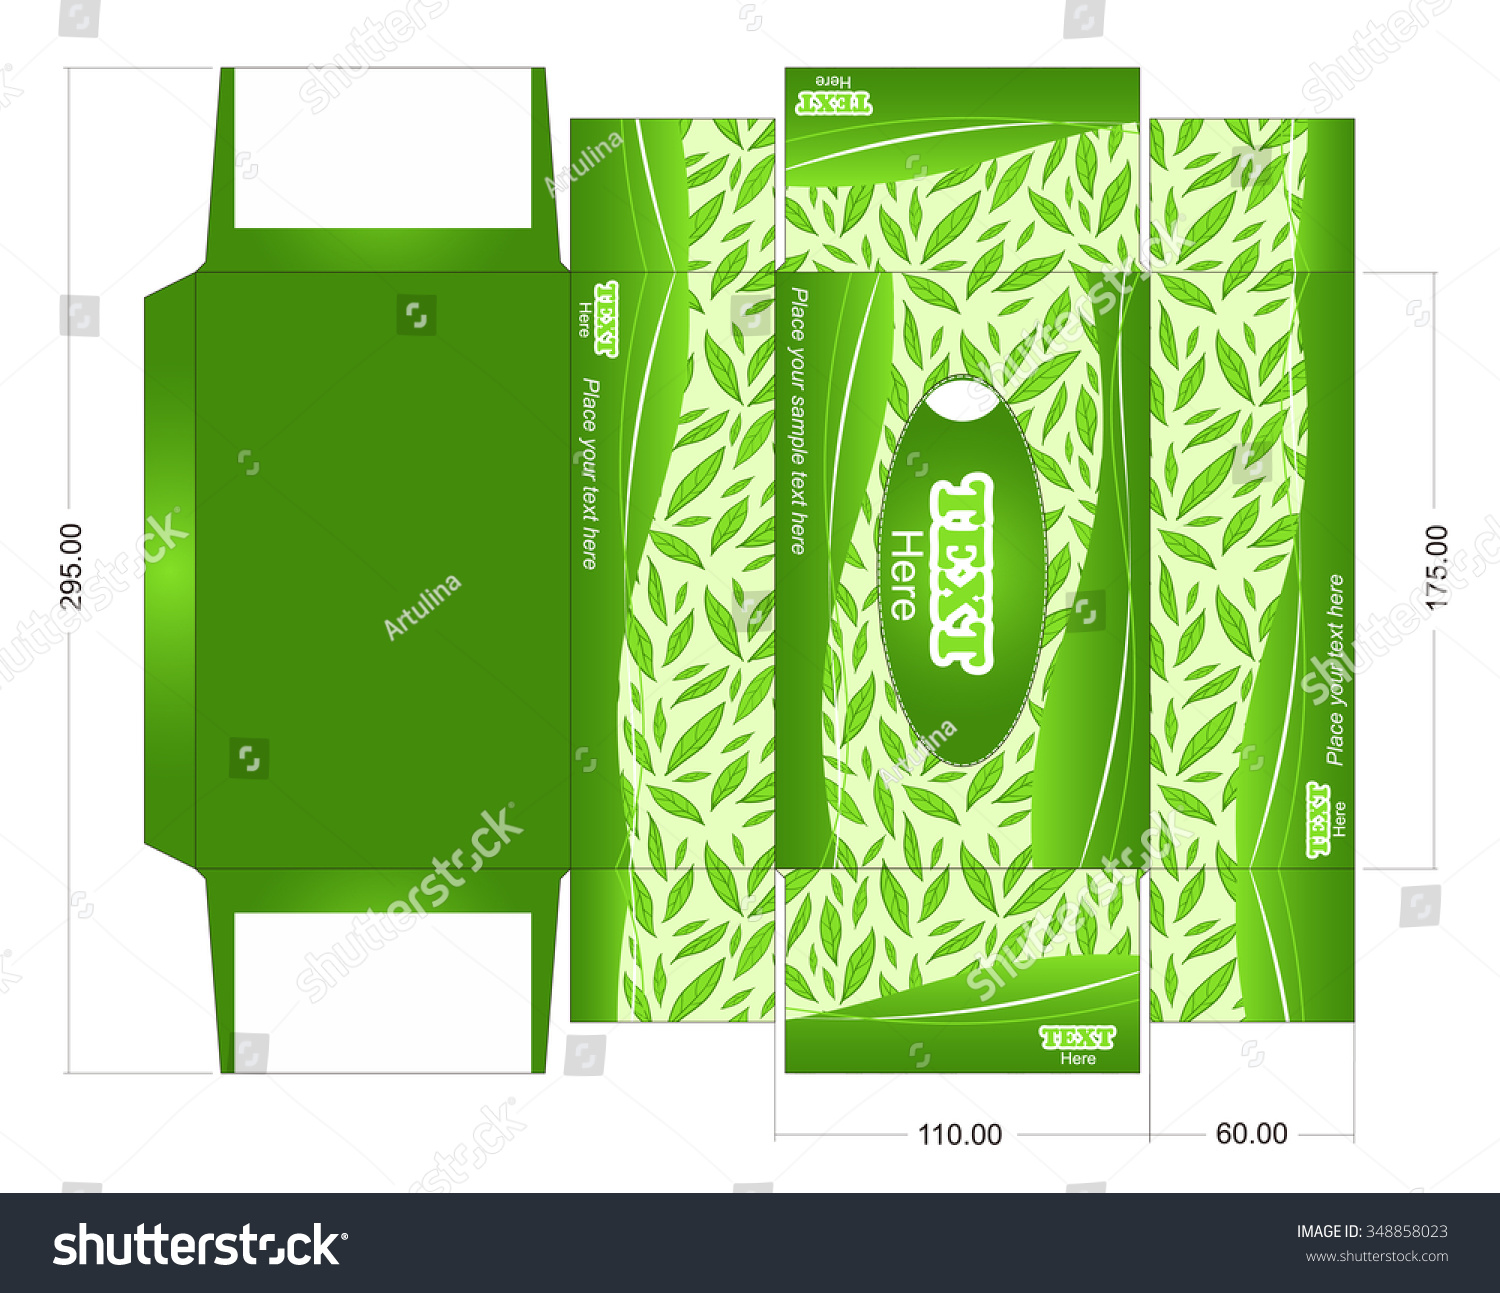 Box Template With Green Leaves Pattern. Vector Die Box For Tissue ...